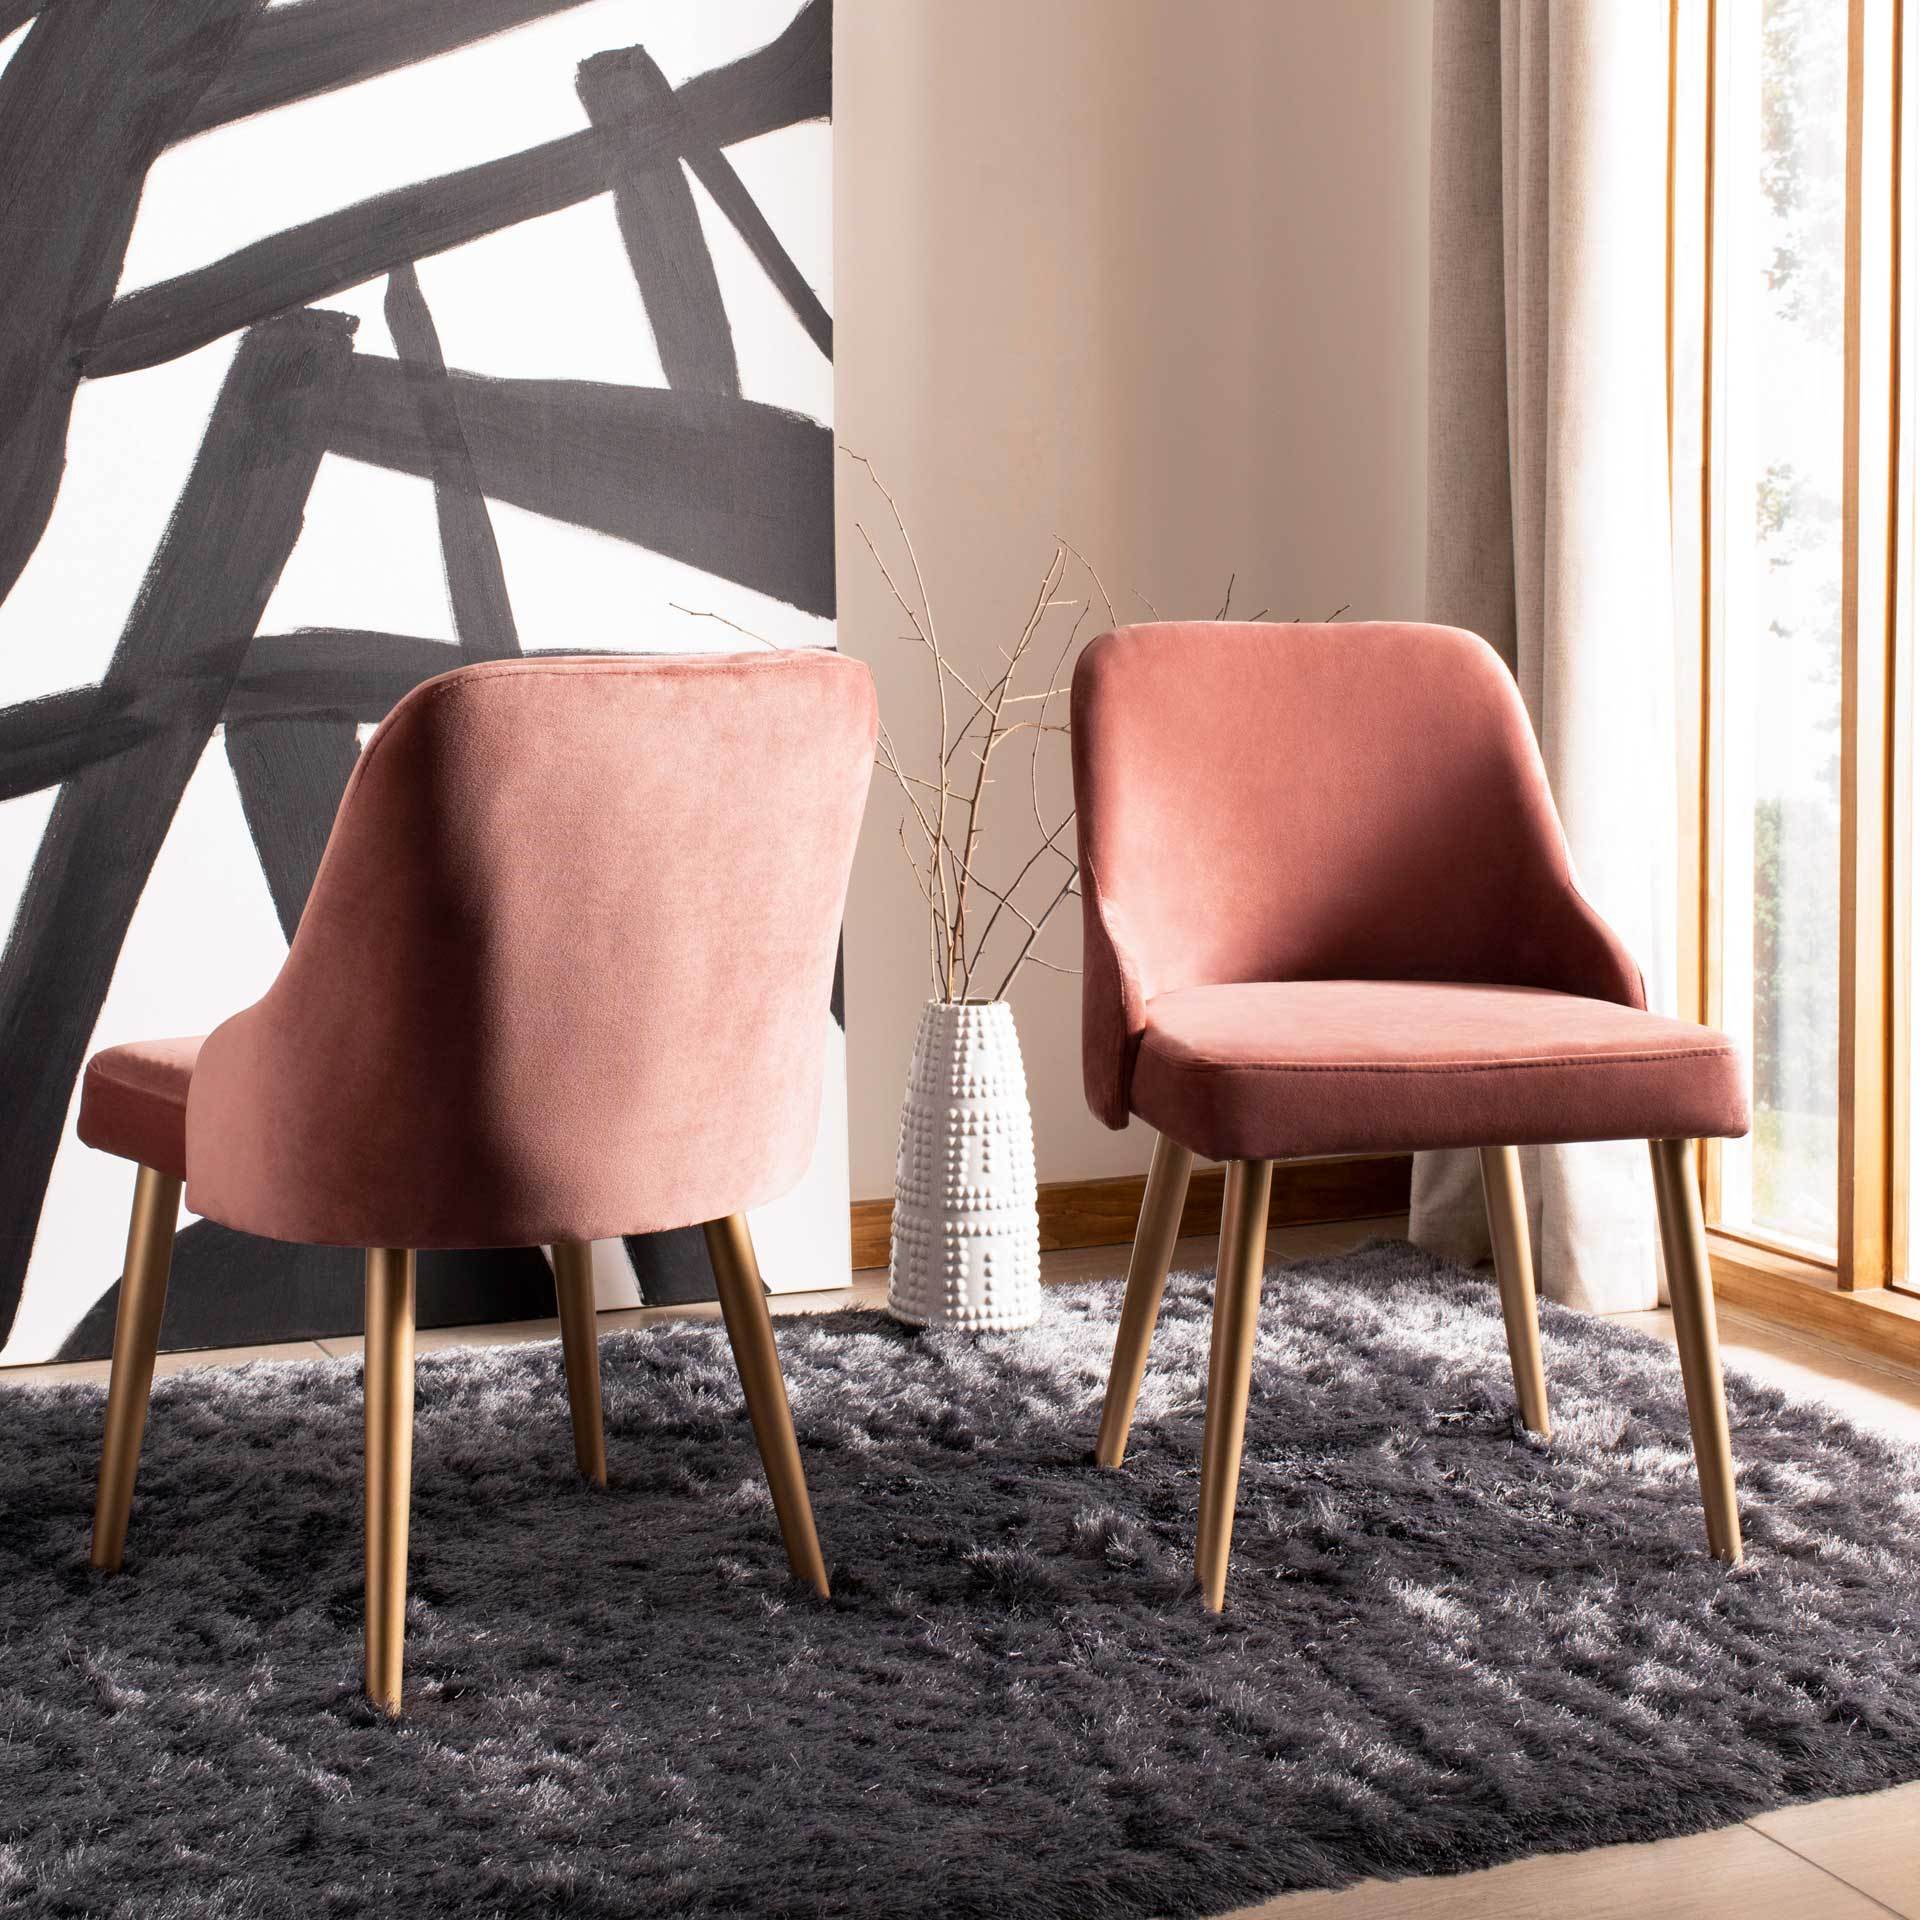 Luis Upholstered Dining Chair Dusty Rose/Gold (Set of 2)